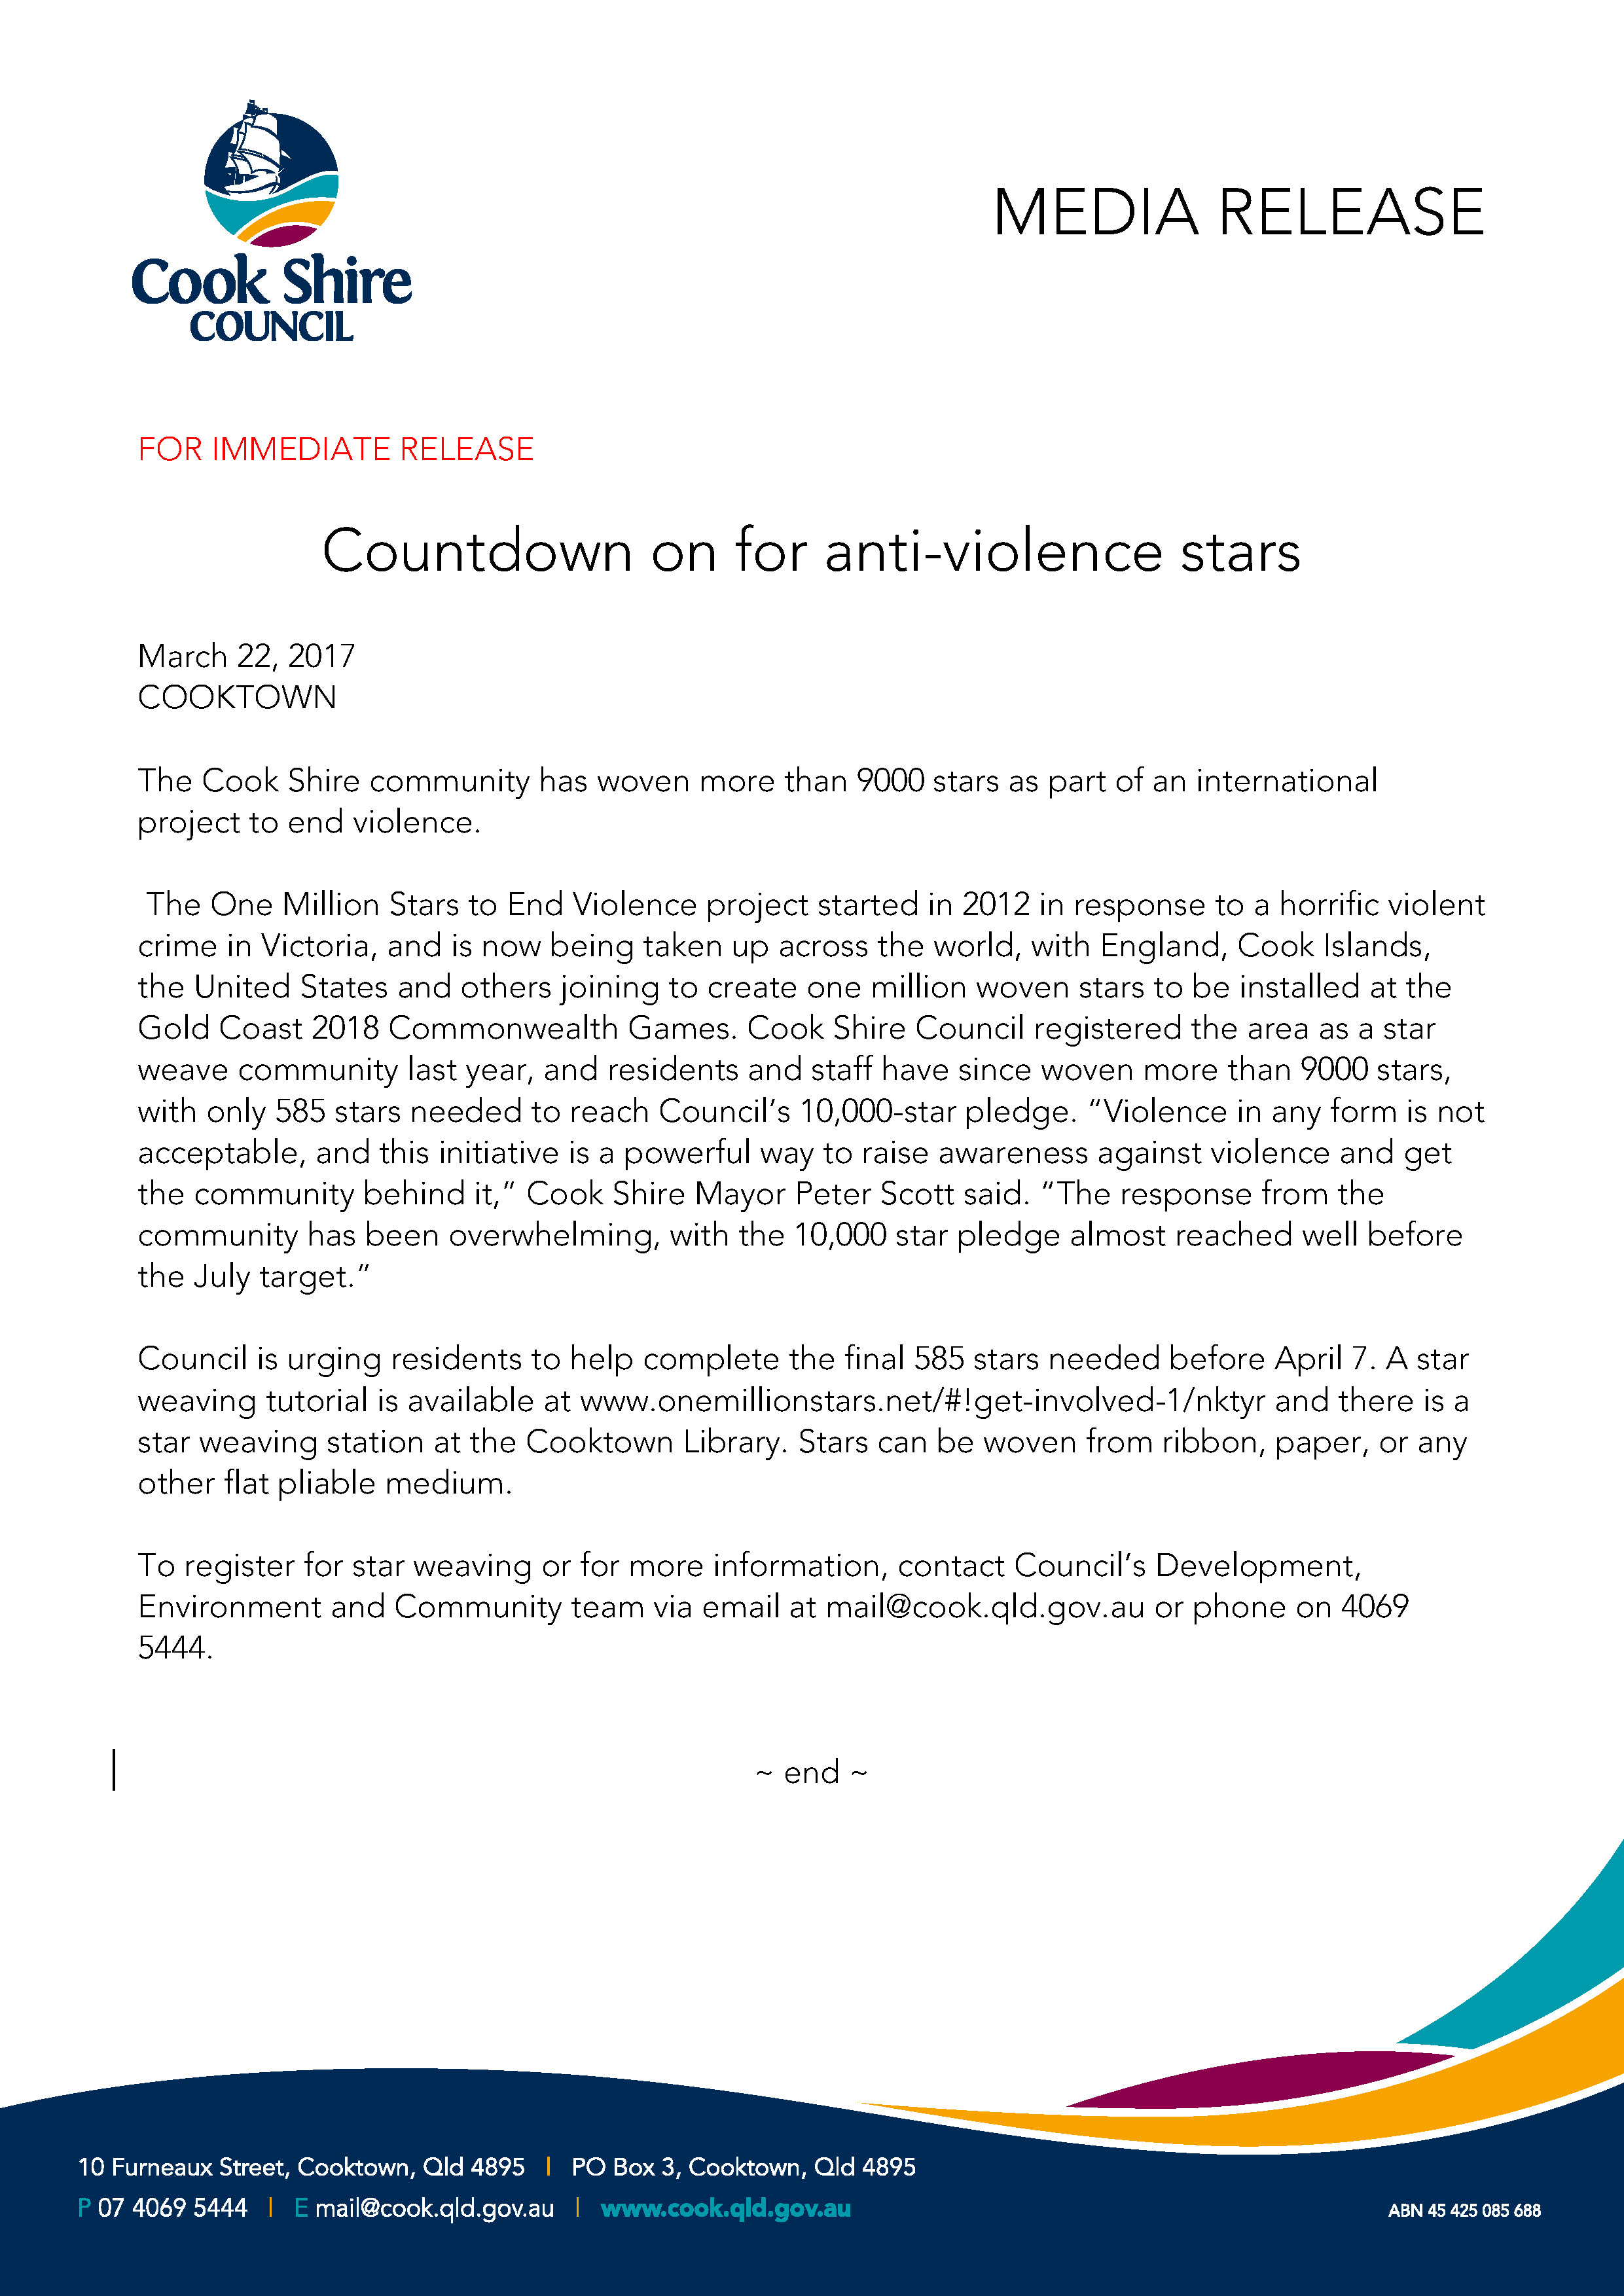 Countdown on for anti violence stars